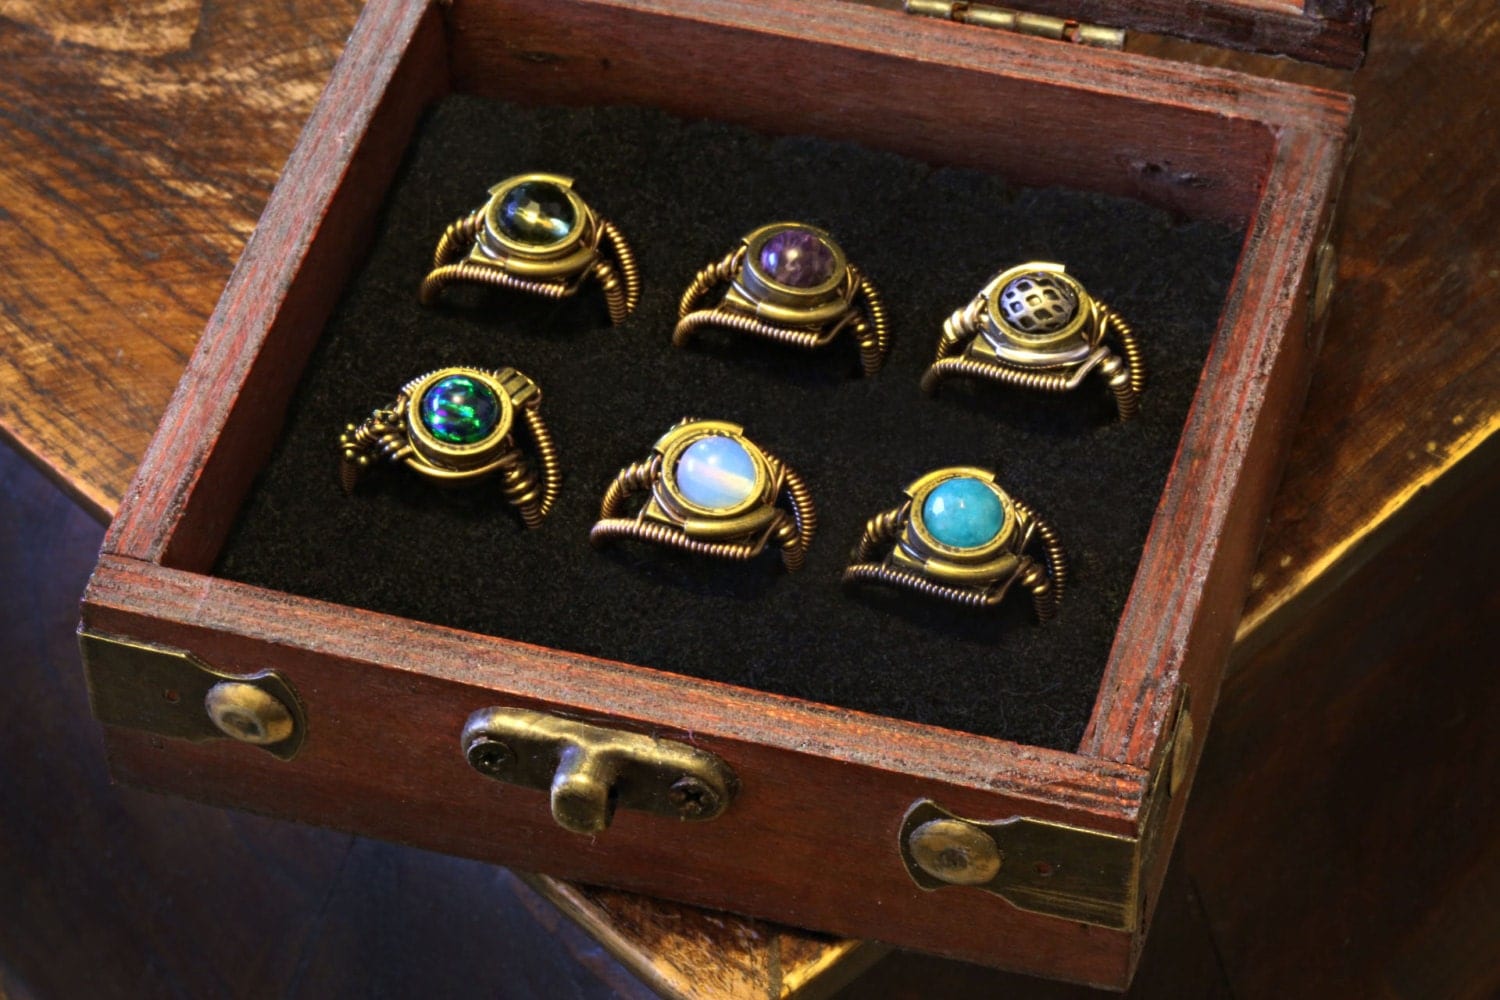 Steampunk Jewelry - 6 Rings in wooden box - Size 8 US - CatherinetteRings 7th anniversary special wholesale price